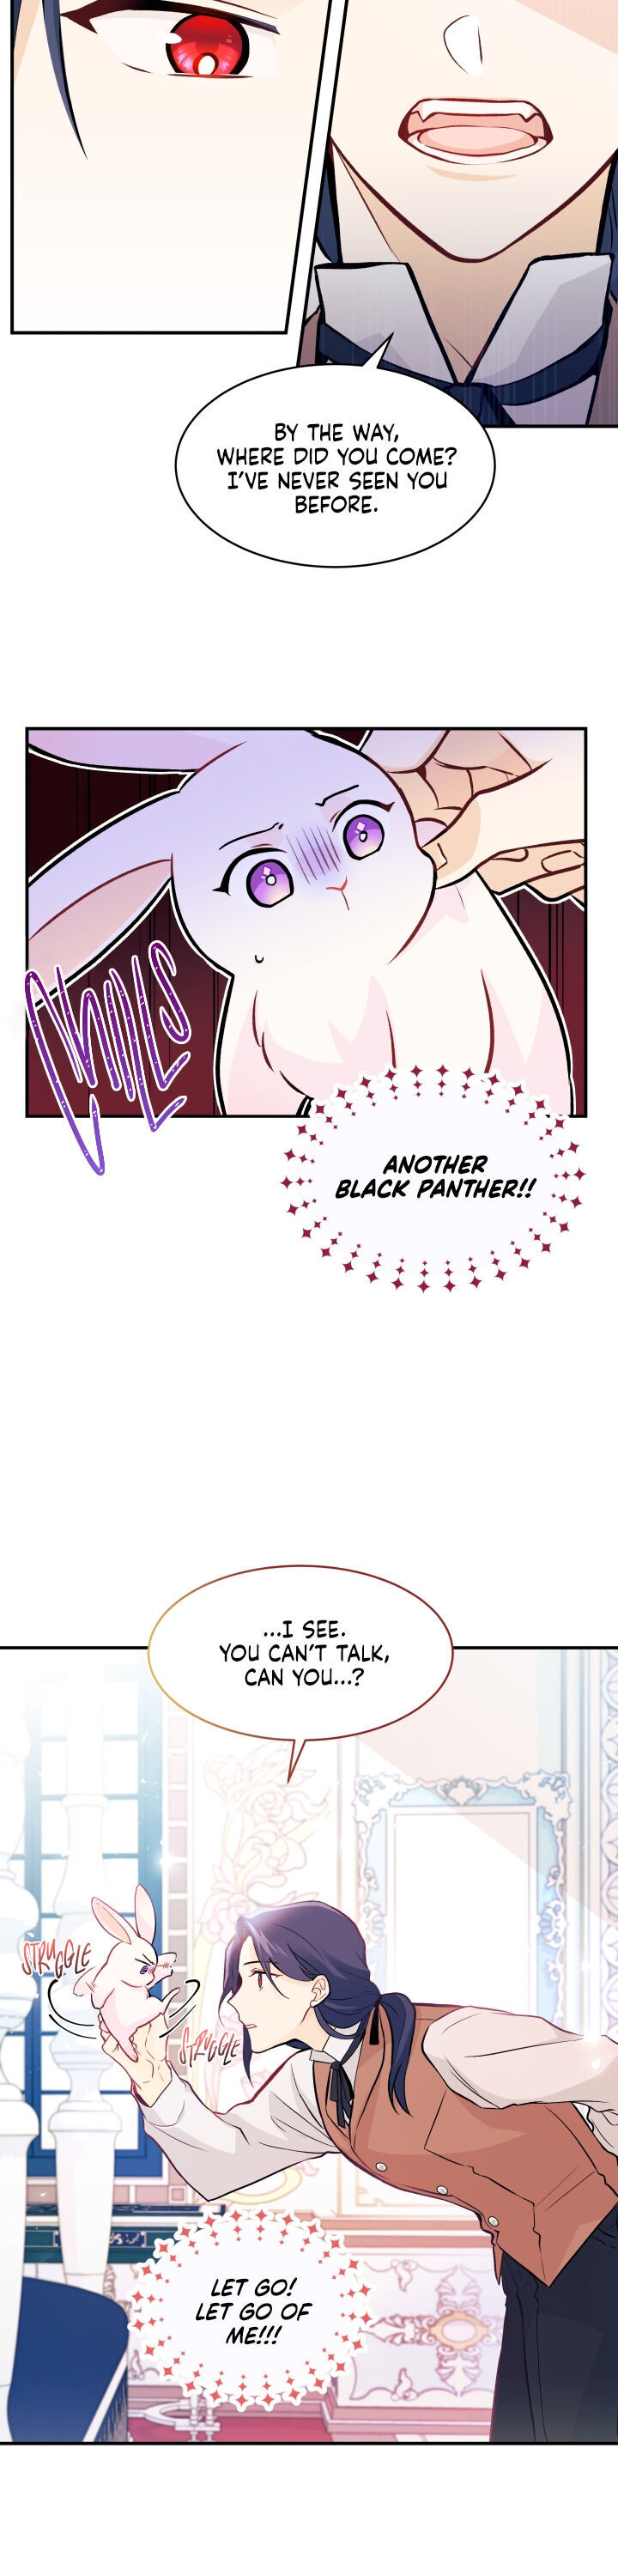 A Symbiotic Relationship Between A Rabbit And A Black Panther - Chapter 2 Page 9